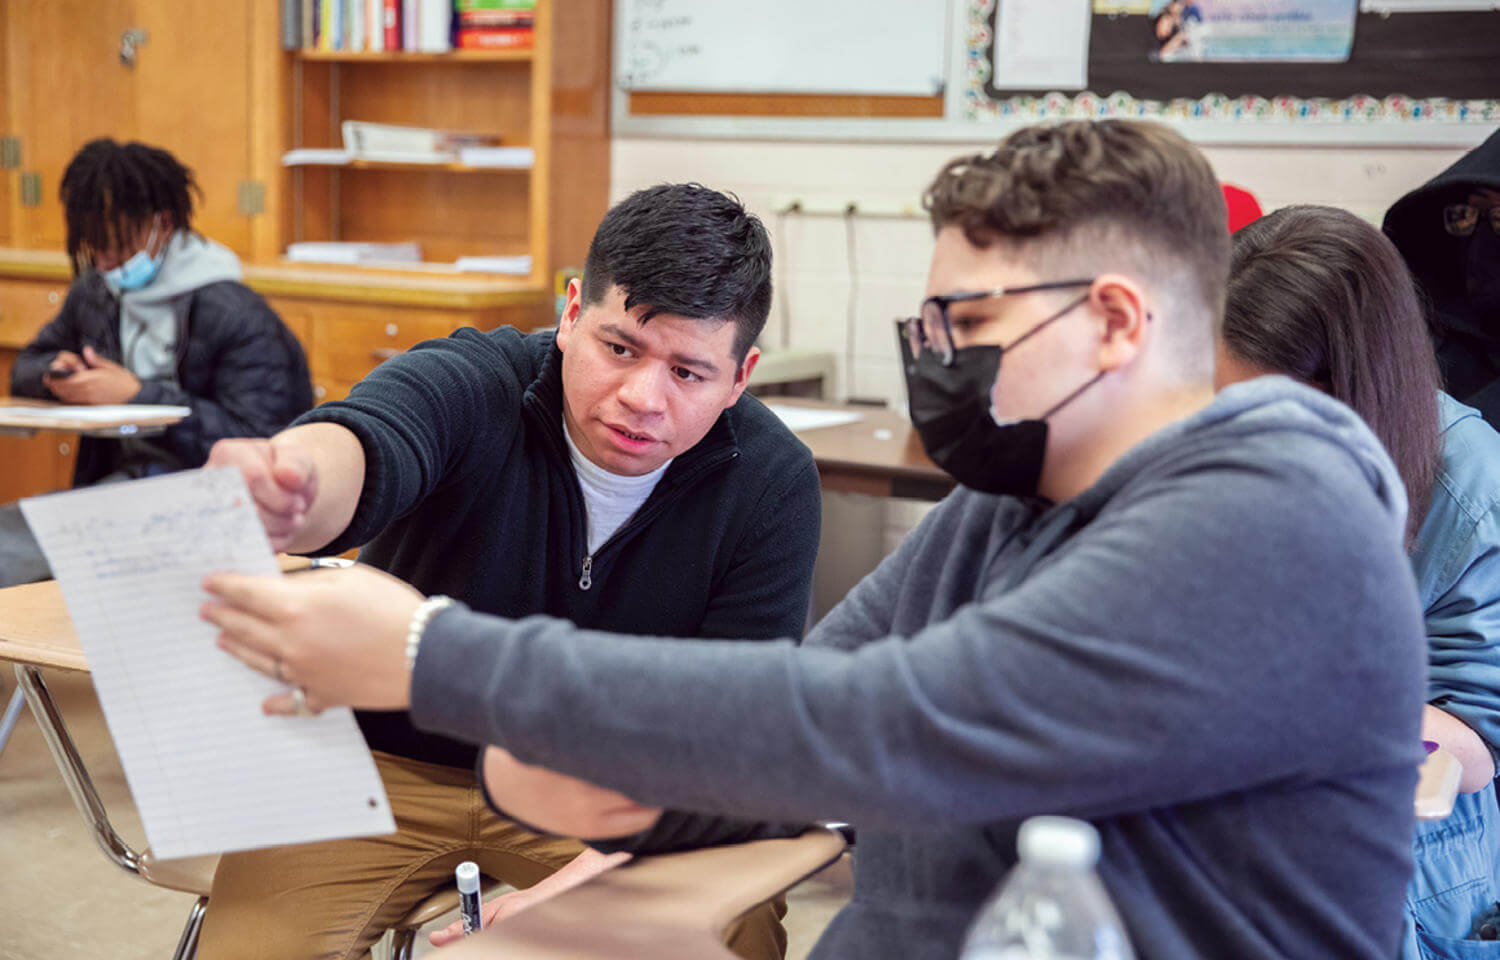 Josh Delgado '15 is reviewing classwork with a student from his Honors Algebra II class.